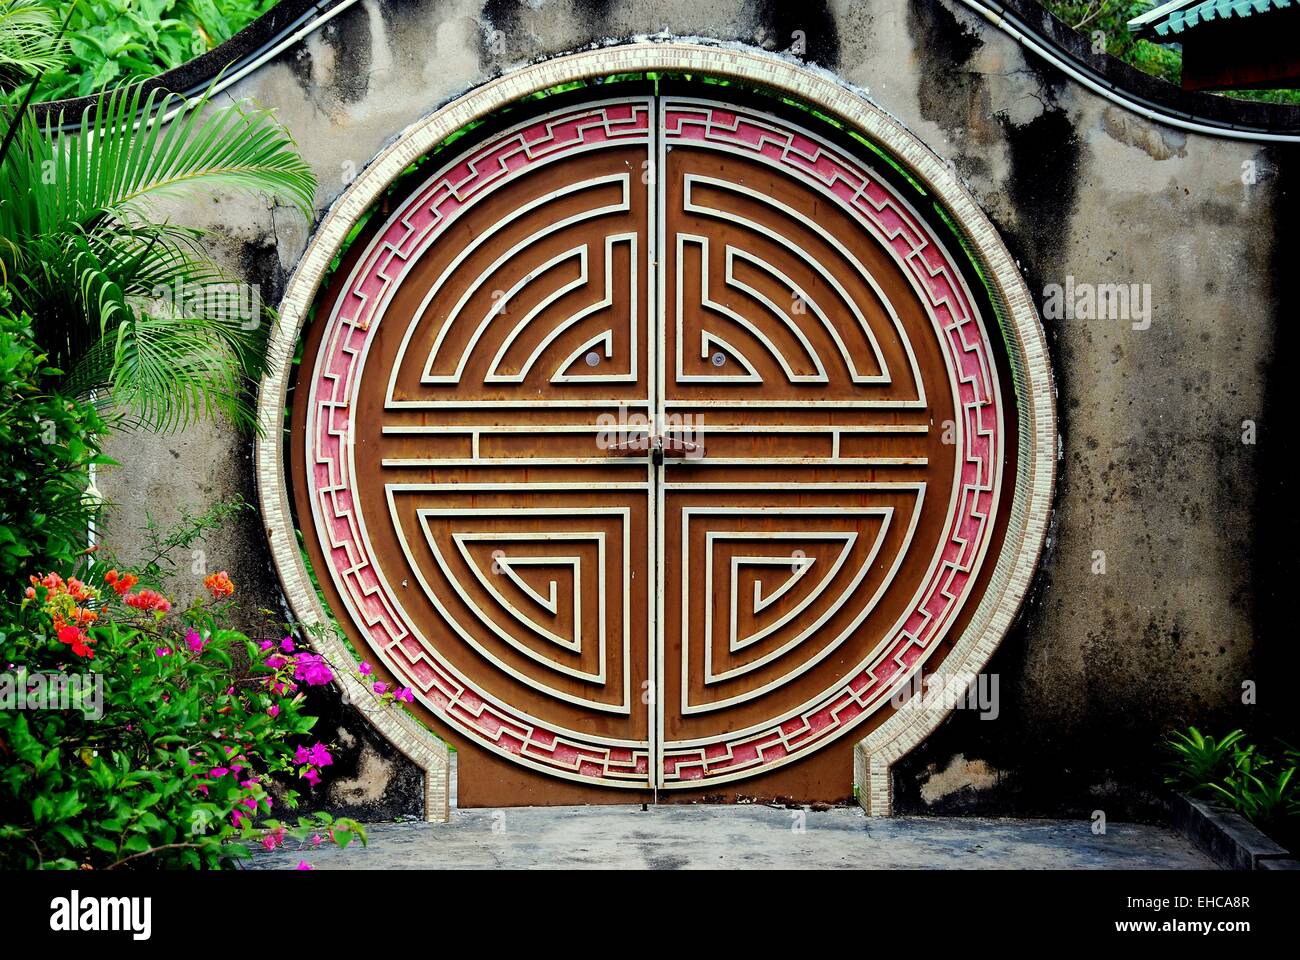 Penang, Malaysia:  A labyrinth moon gate doorway in the gardens at the Snake Temple on Penang Island  * Stock Photo